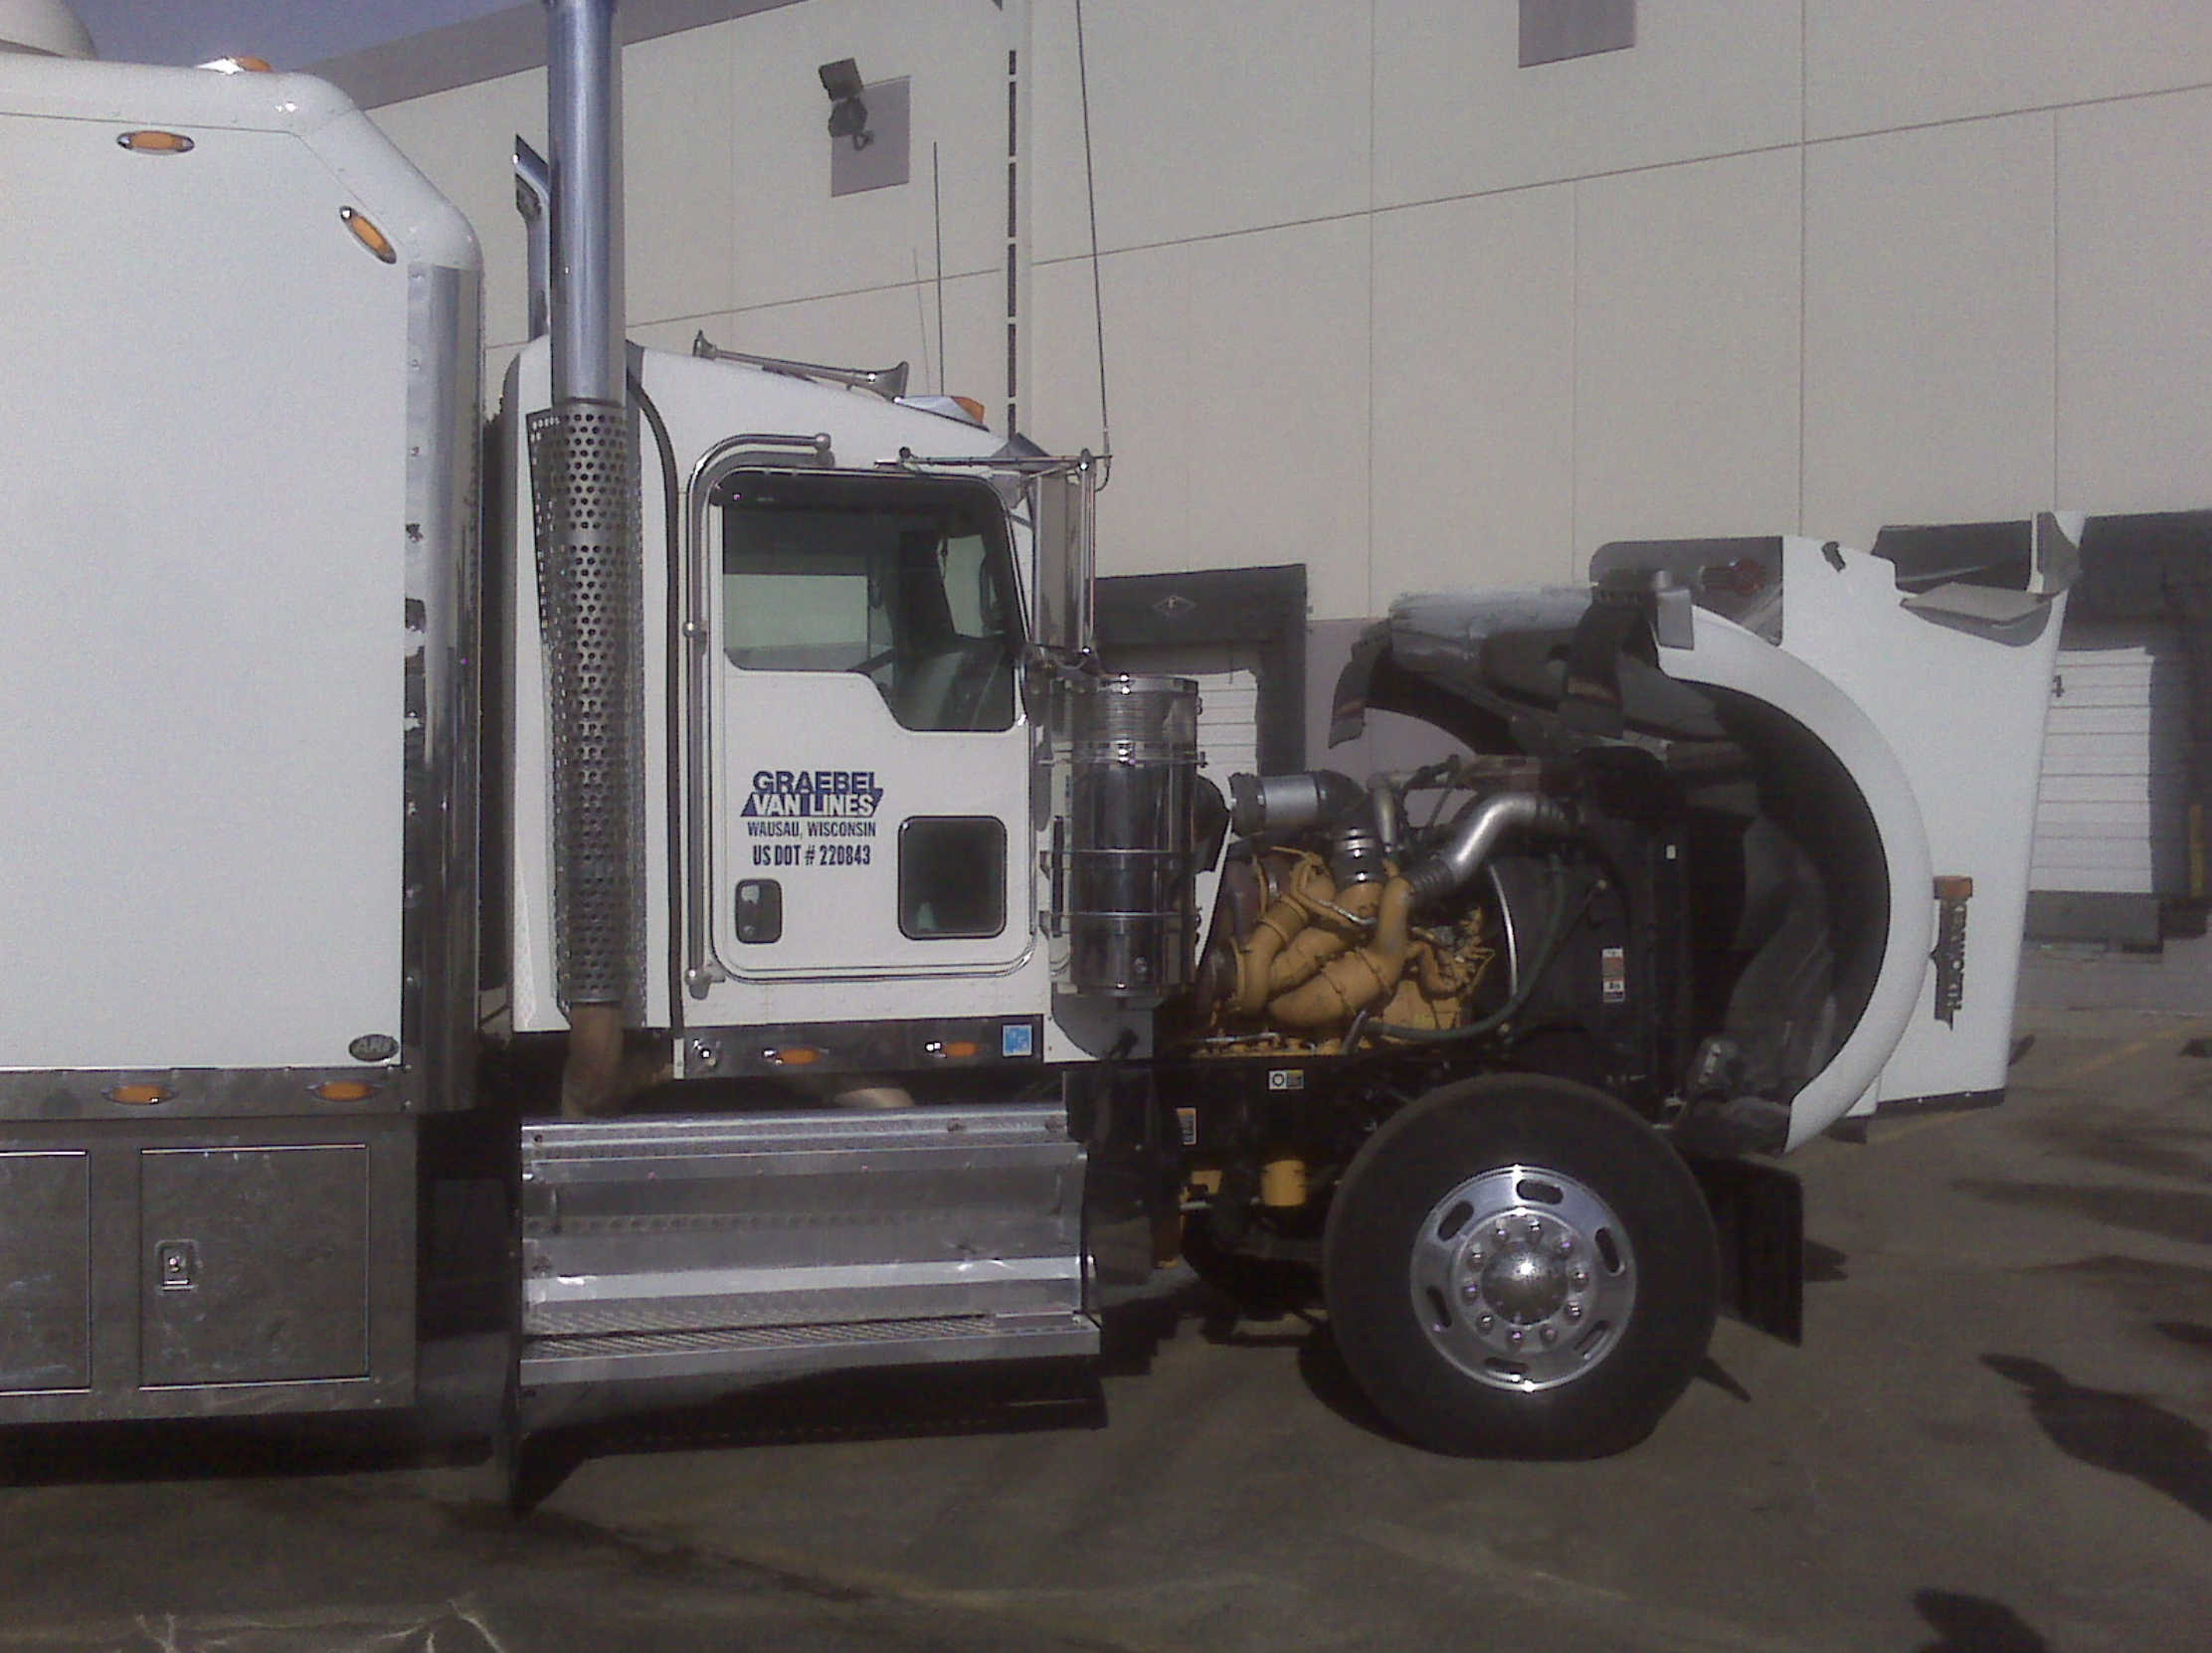 this image shows mobile truck repair services in Carson City, Nevada